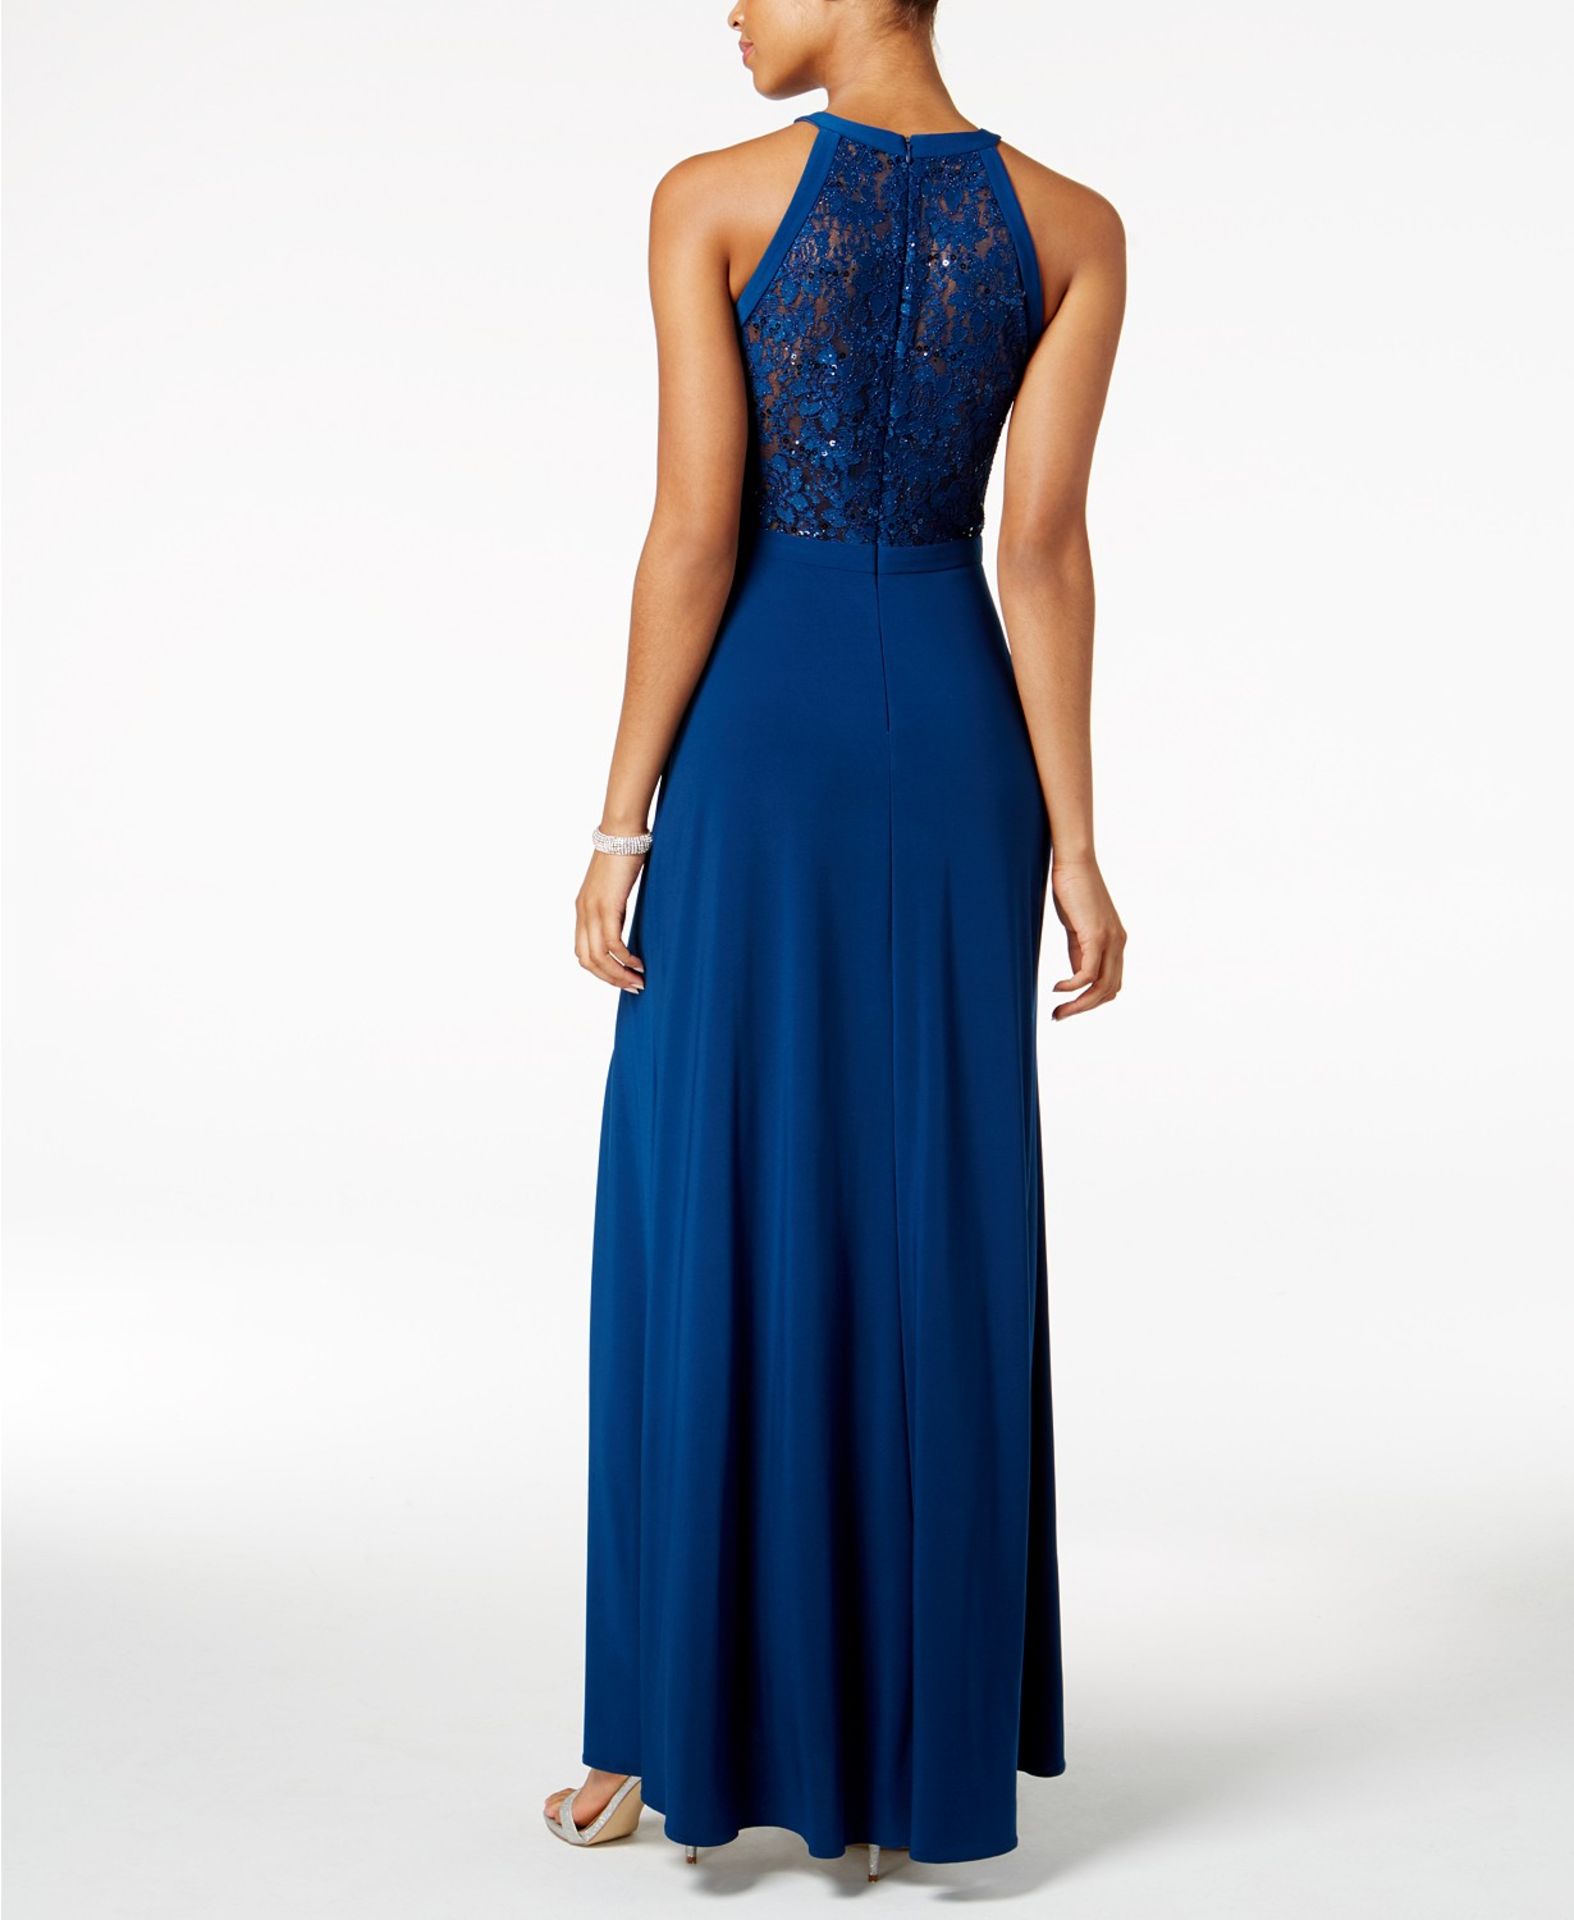 Nightway Lace Halter Gown Colour Peacock Rrp £108 Size 12 - Image 2 of 2